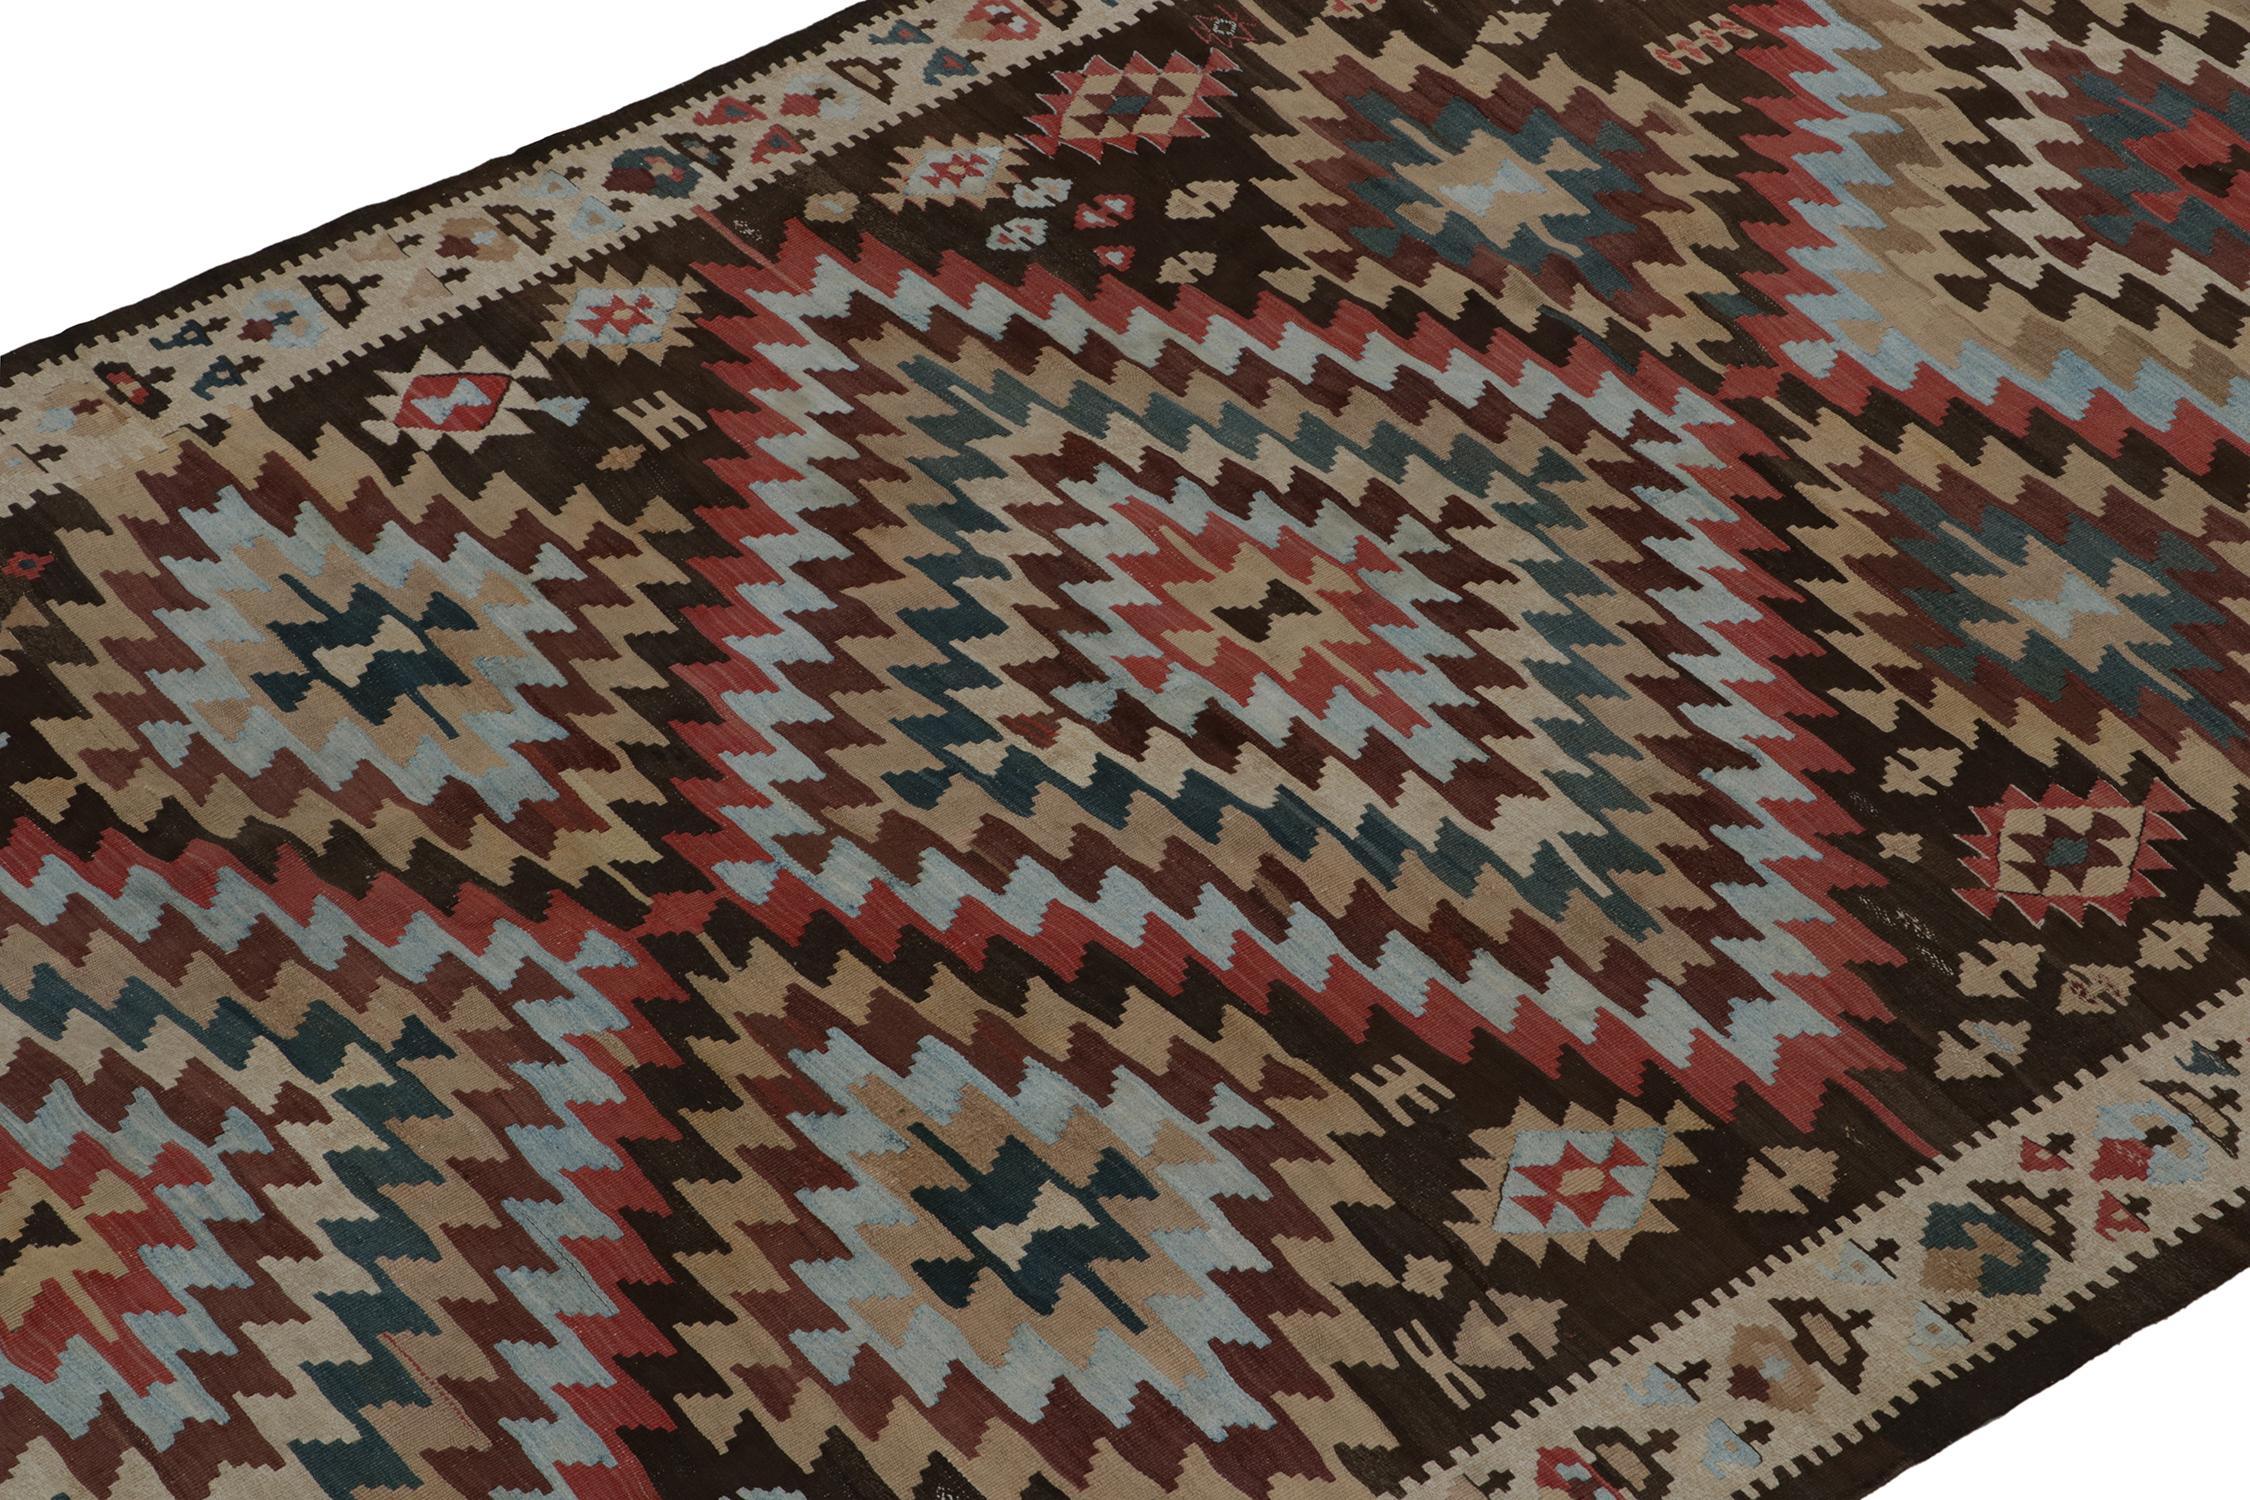 Vintage Persian Tribal Kilim in Polychromatic Geometric Patterns by Rug & Kilim In Good Condition For Sale In Long Island City, NY